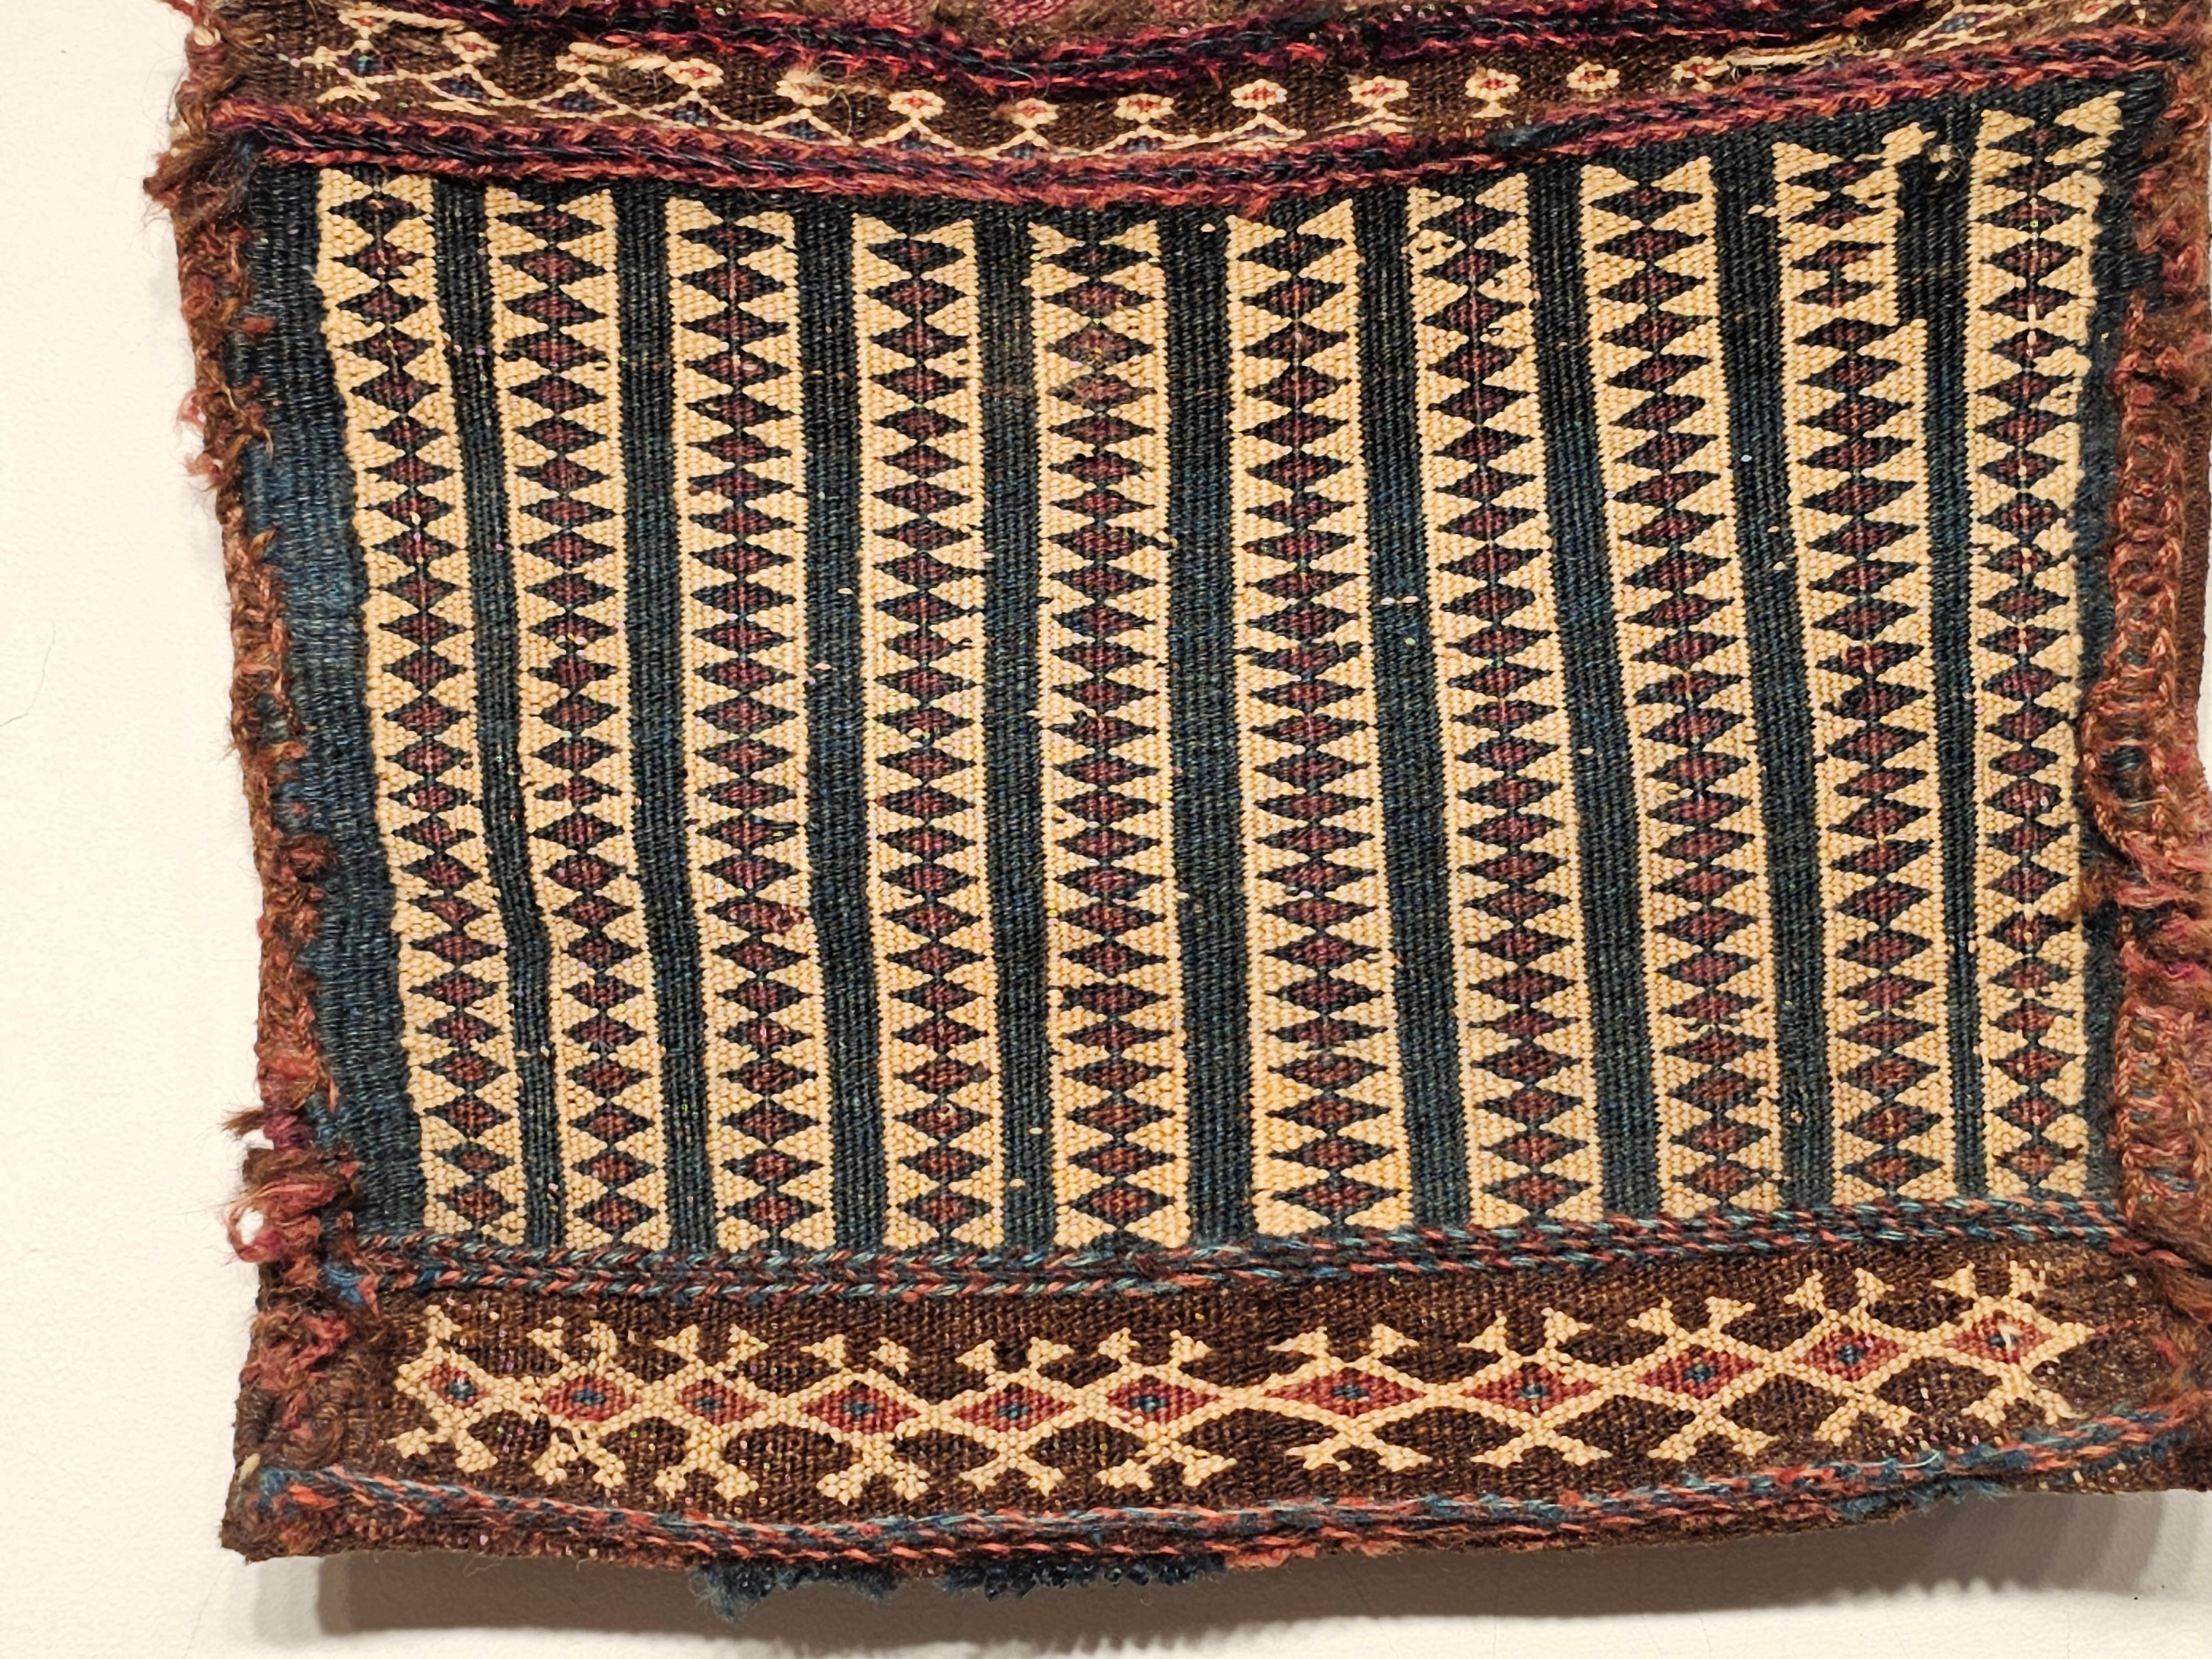 A 19th century Persian Baluch tribal soumak double saddlebag.   The front of the bag has a beautiful geometric design in a green/blue color set on a yellow background.  The variation in color in the green/blue design is very beautiful.  The Baluch